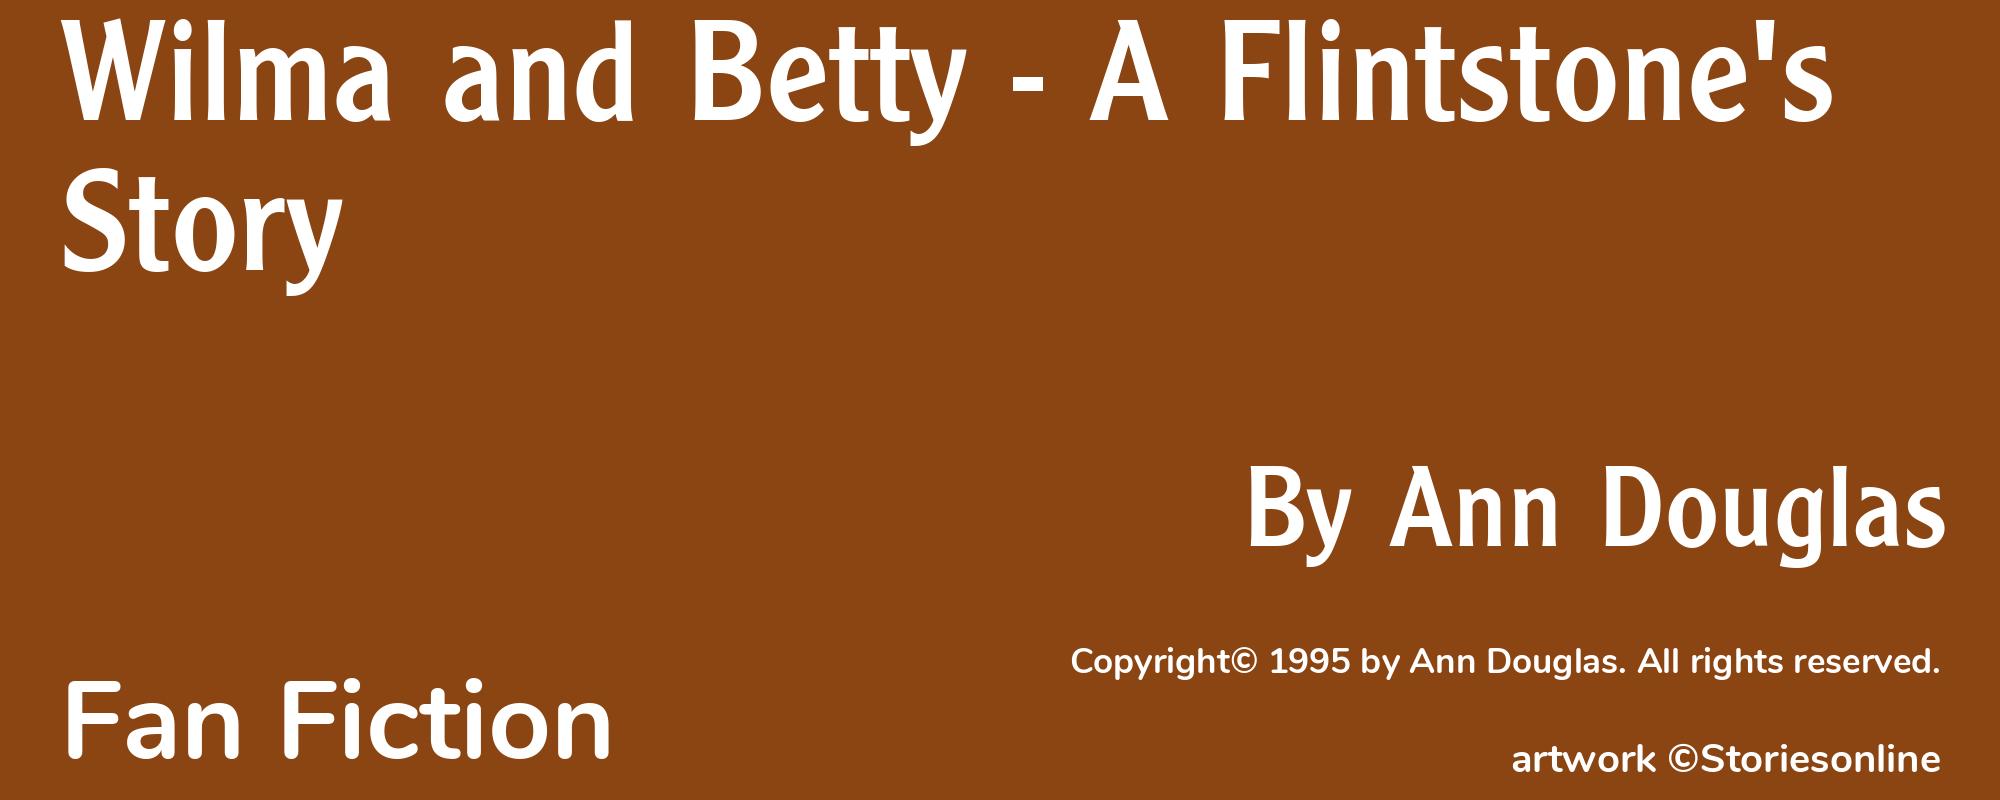 Wilma and Betty - A Flintstone's Story - Cover